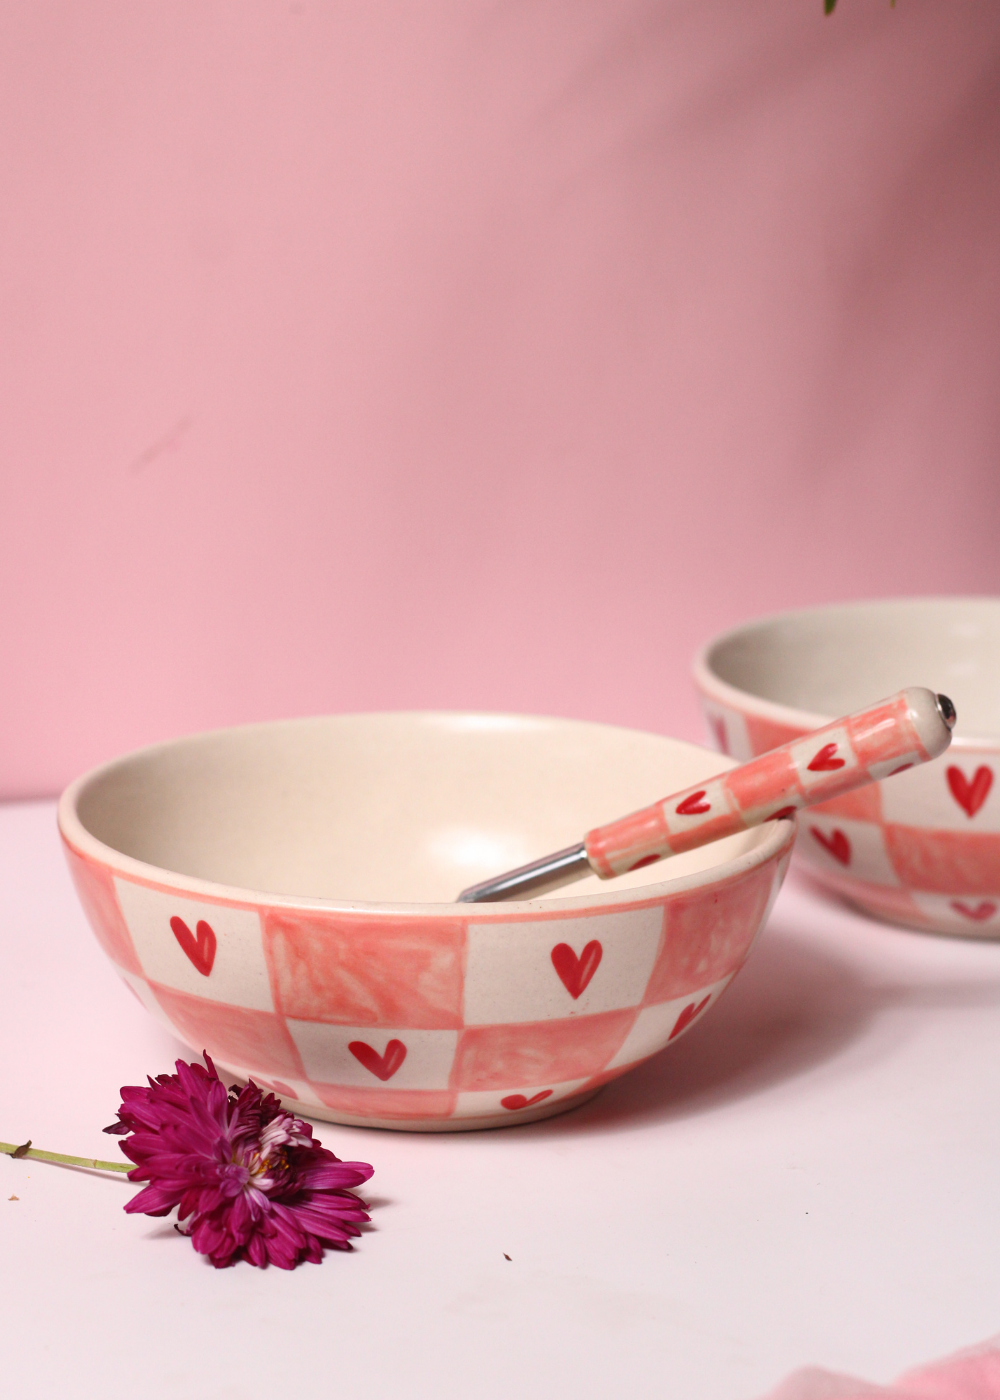 Checkered heart curry bowls with spoon